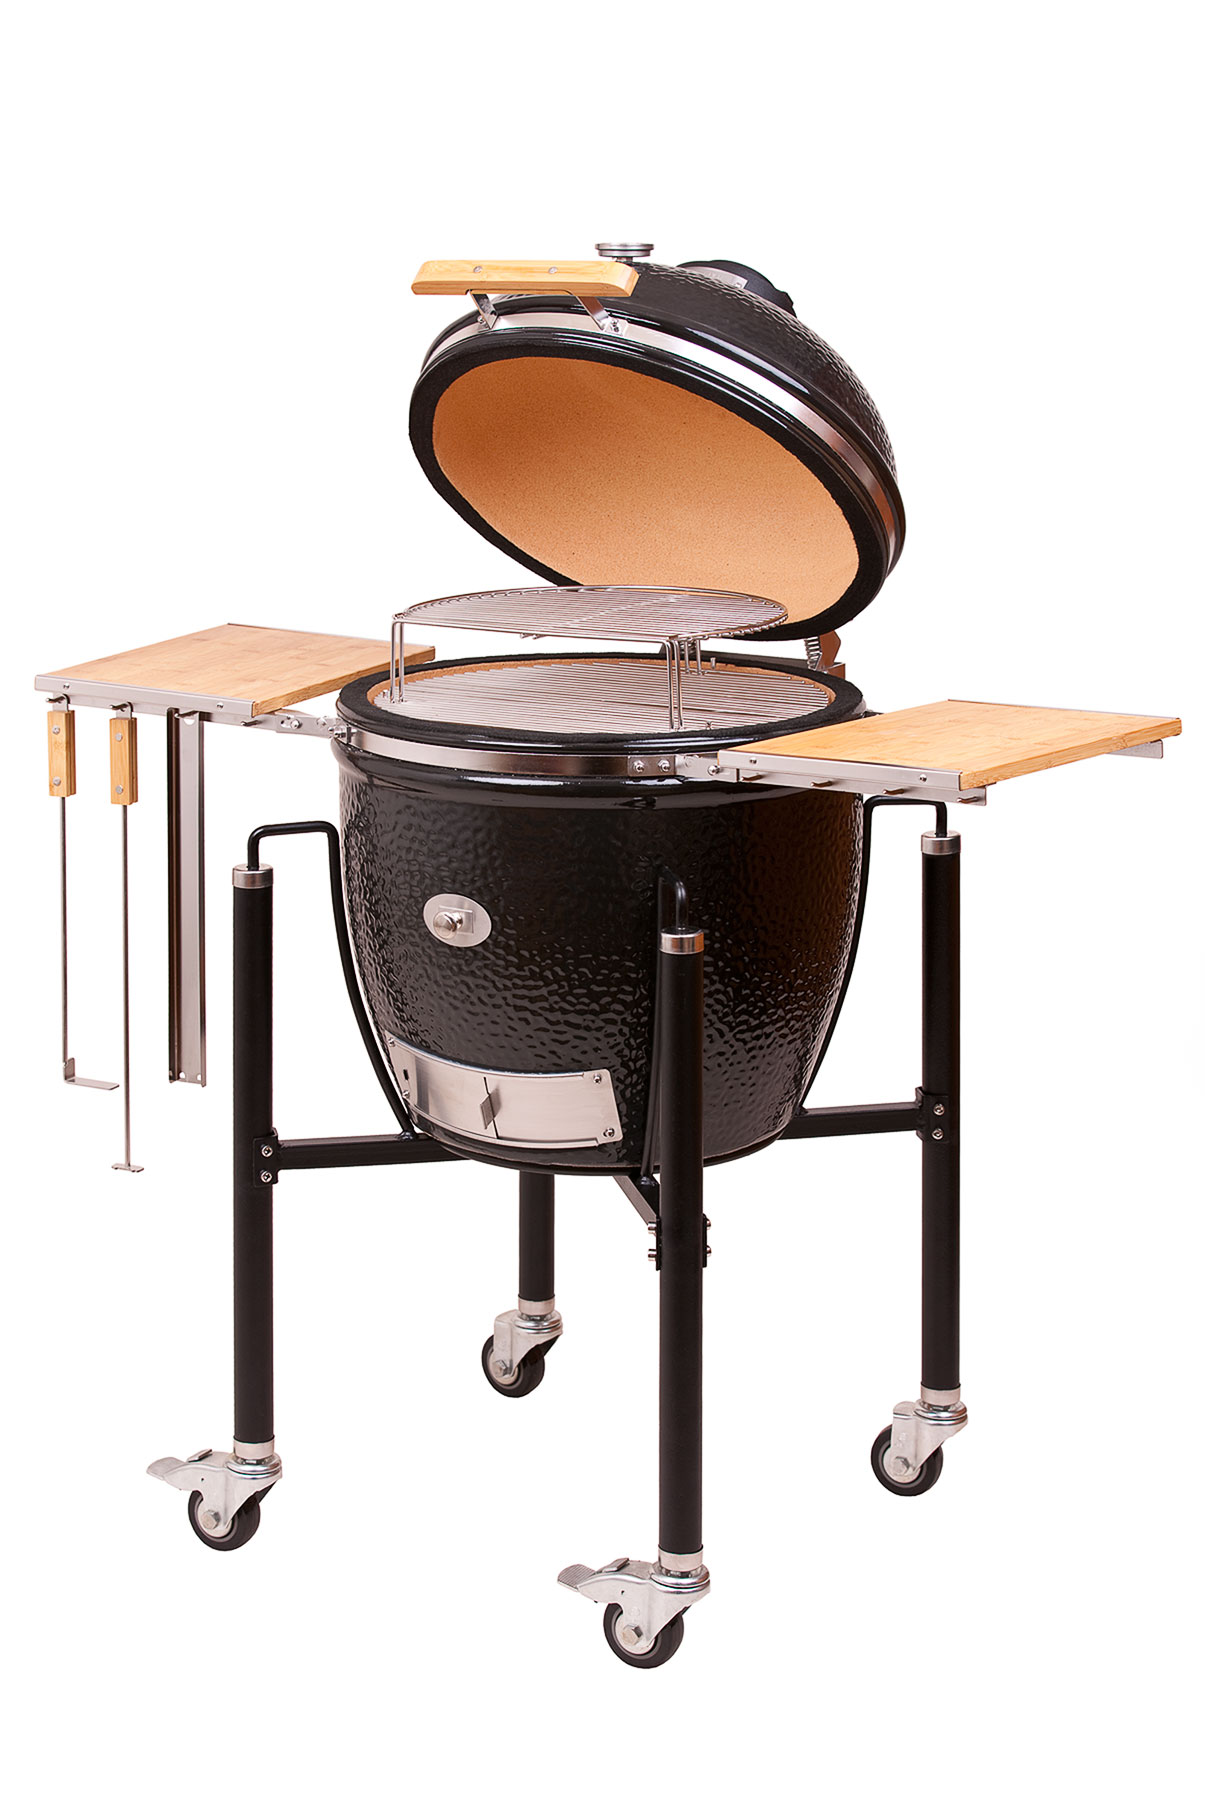 Monolith Classic 46cm Kamado Ceramic Barbecue Grill Black with Cart